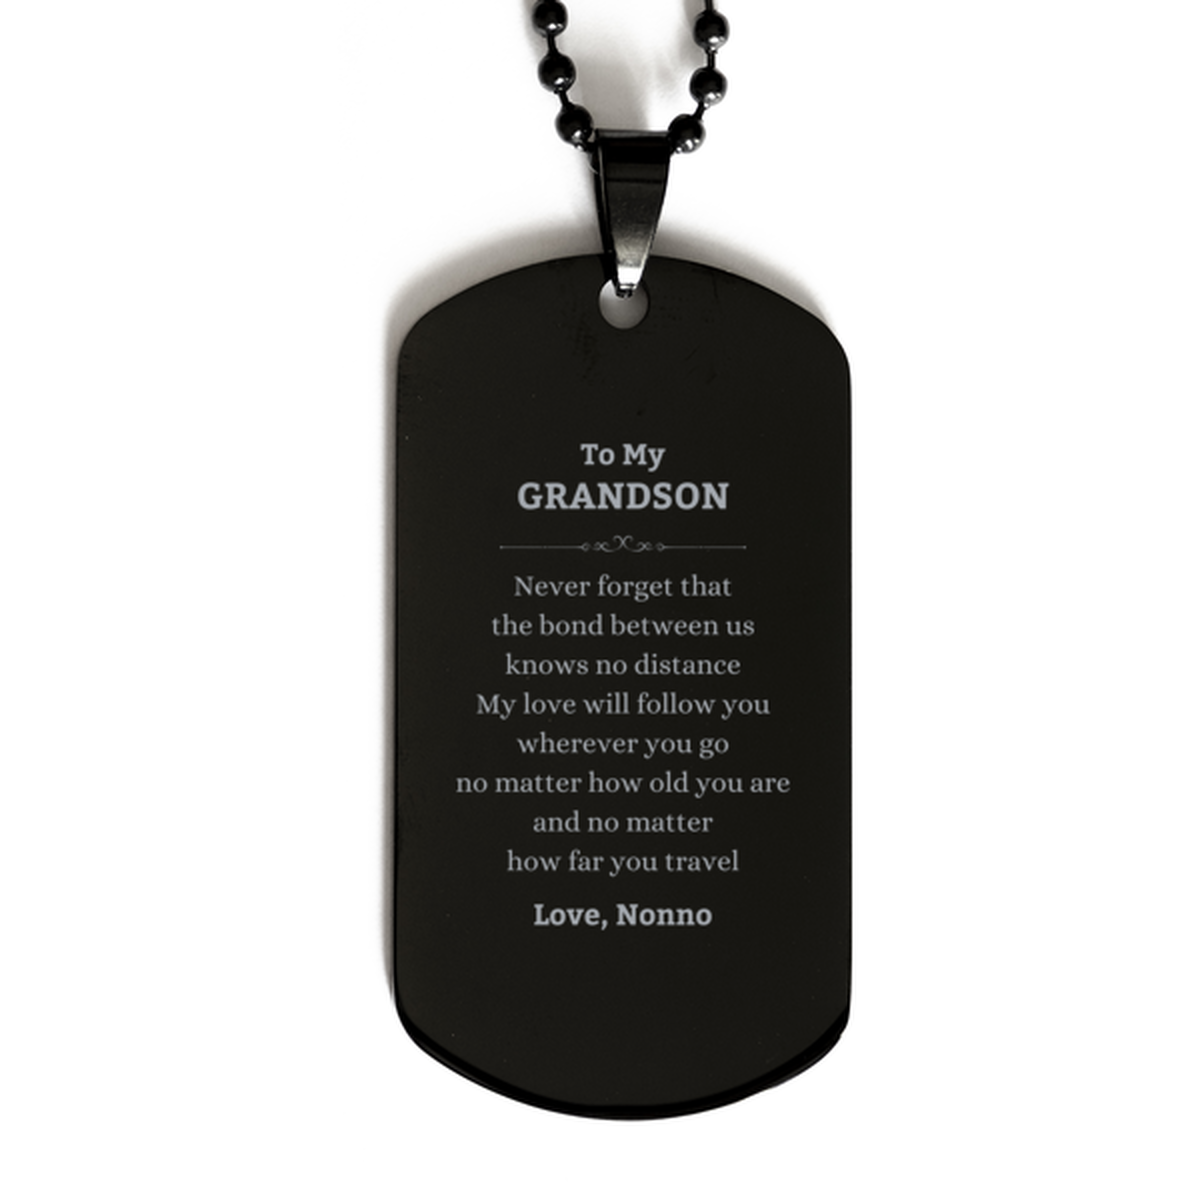 Grandson Birthday Gifts from Nonno, Adjustable Black Dog Tag for Grandson Christmas Graduation Unique Gifts Grandson Never forget that the bond between us knows no distance. Love, Nonno